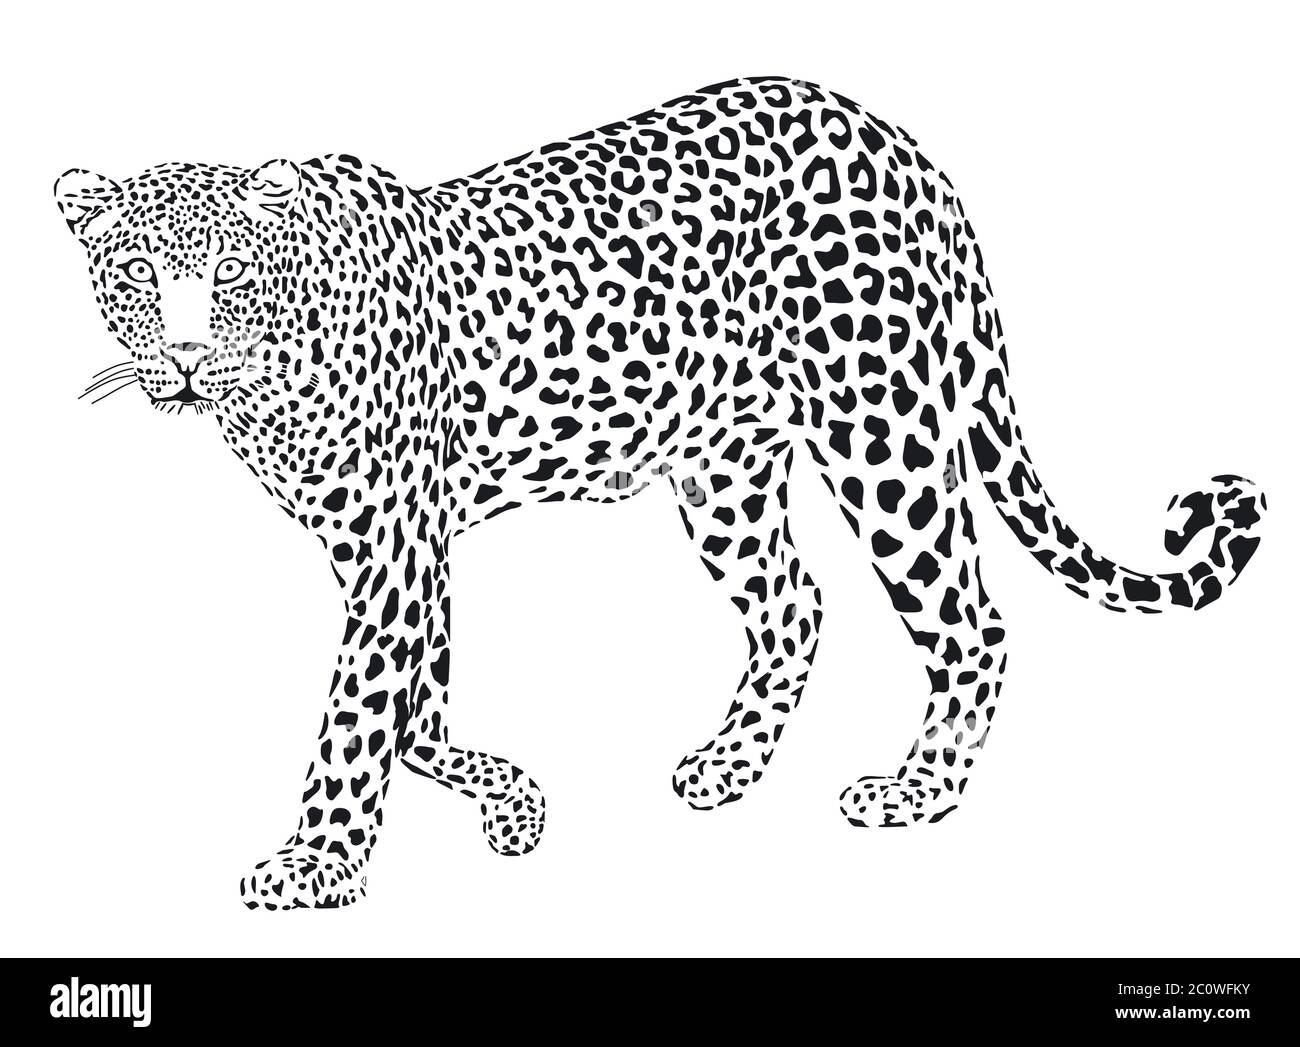 leopard black and white Stock Photo